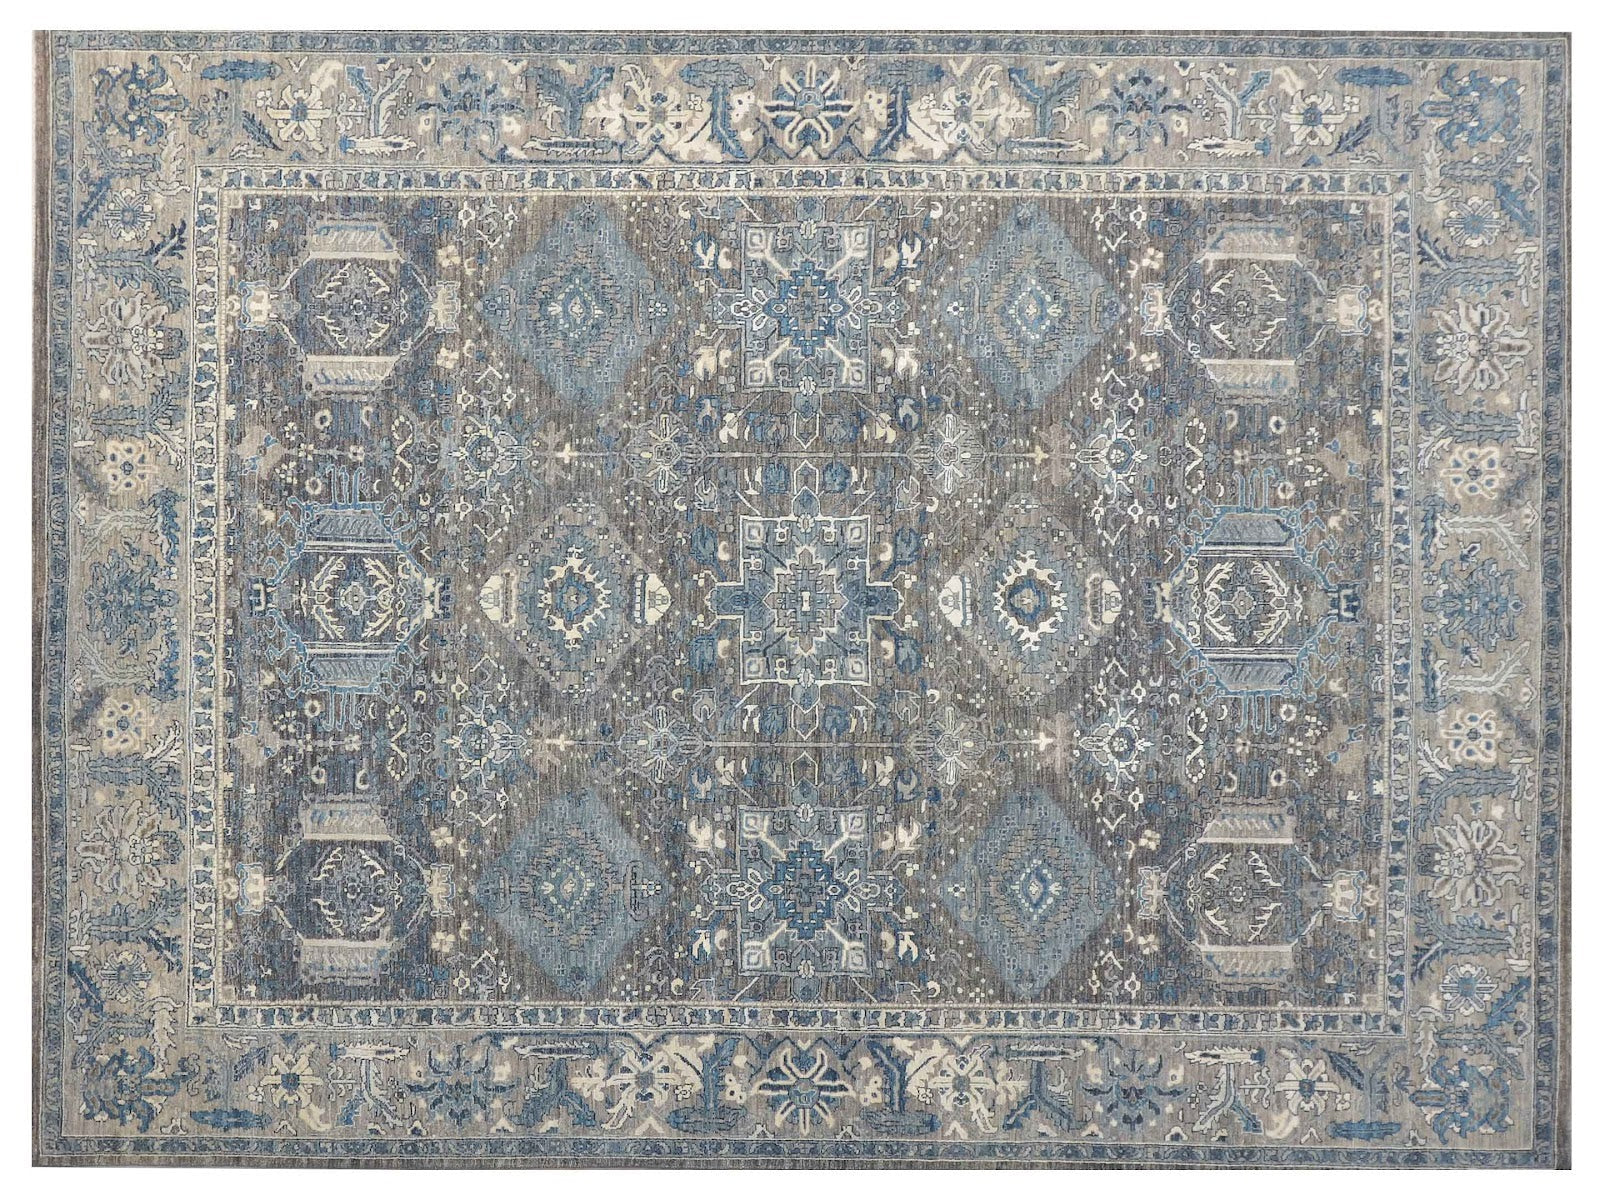 8x10 hand-knotted Ziegler rug with a geometric design in dark gray and gray borders, made from a luxurious silk and wool blend.